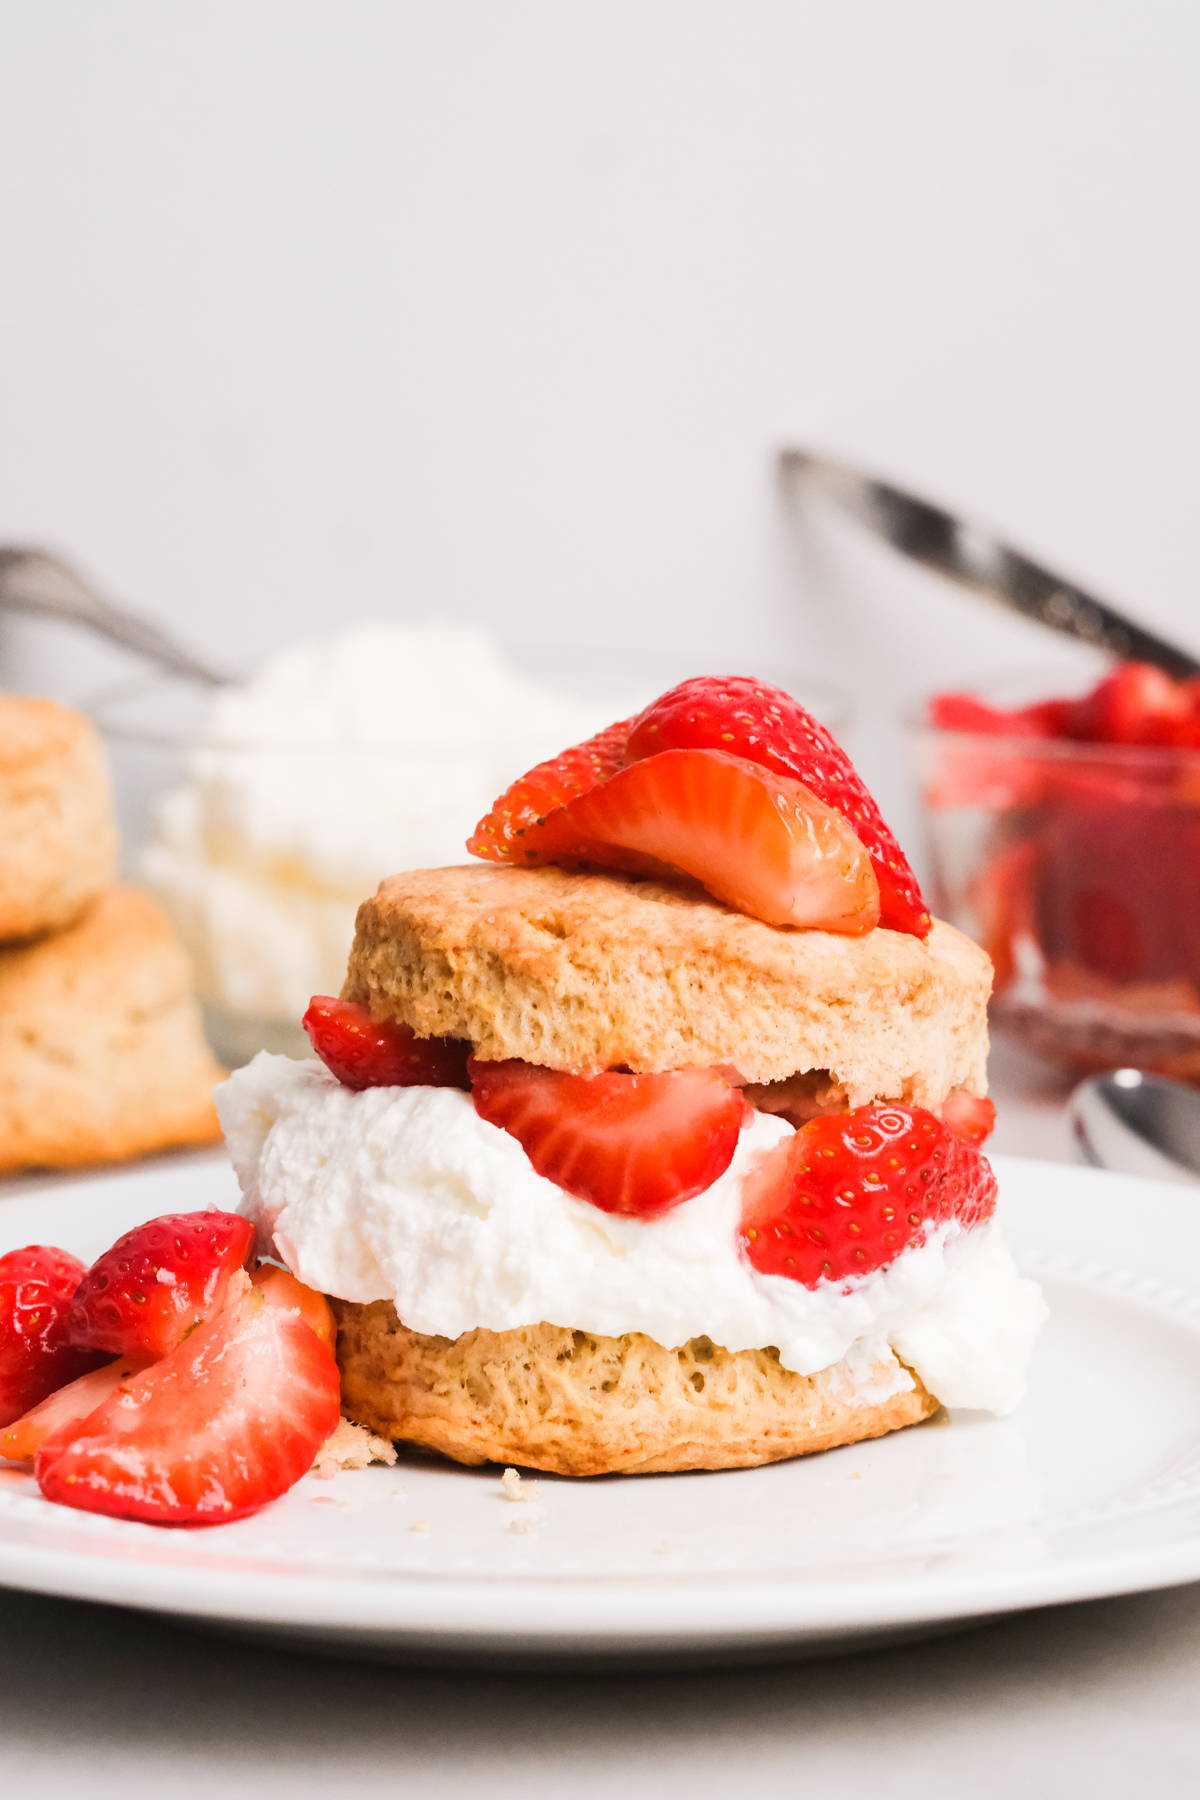 strawberry shortcake with whipped cream on a plate